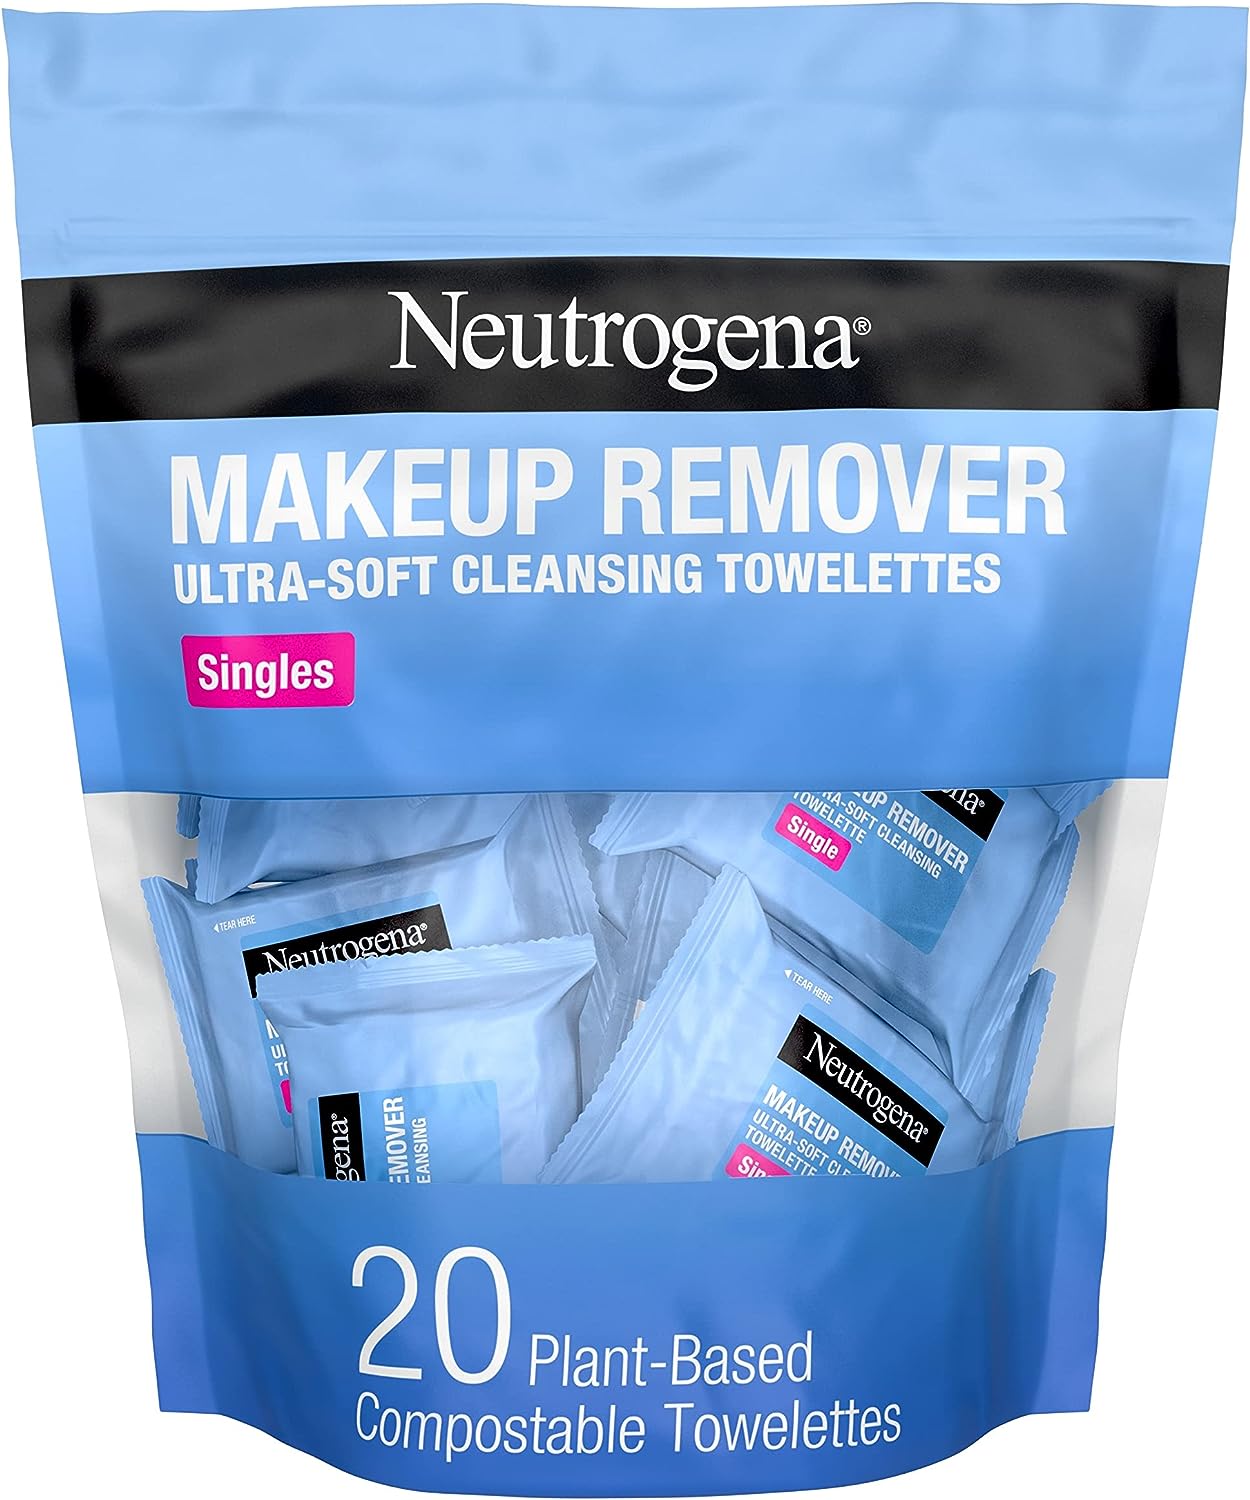 Neutrogena Facial Cleansing Towelette Singles, Daily Face Wipes to Remove Dirt, Oil, Makeup Waterproof Mascara, Gentle, Alcohol-Free, Individually Wrapped, 20 Count